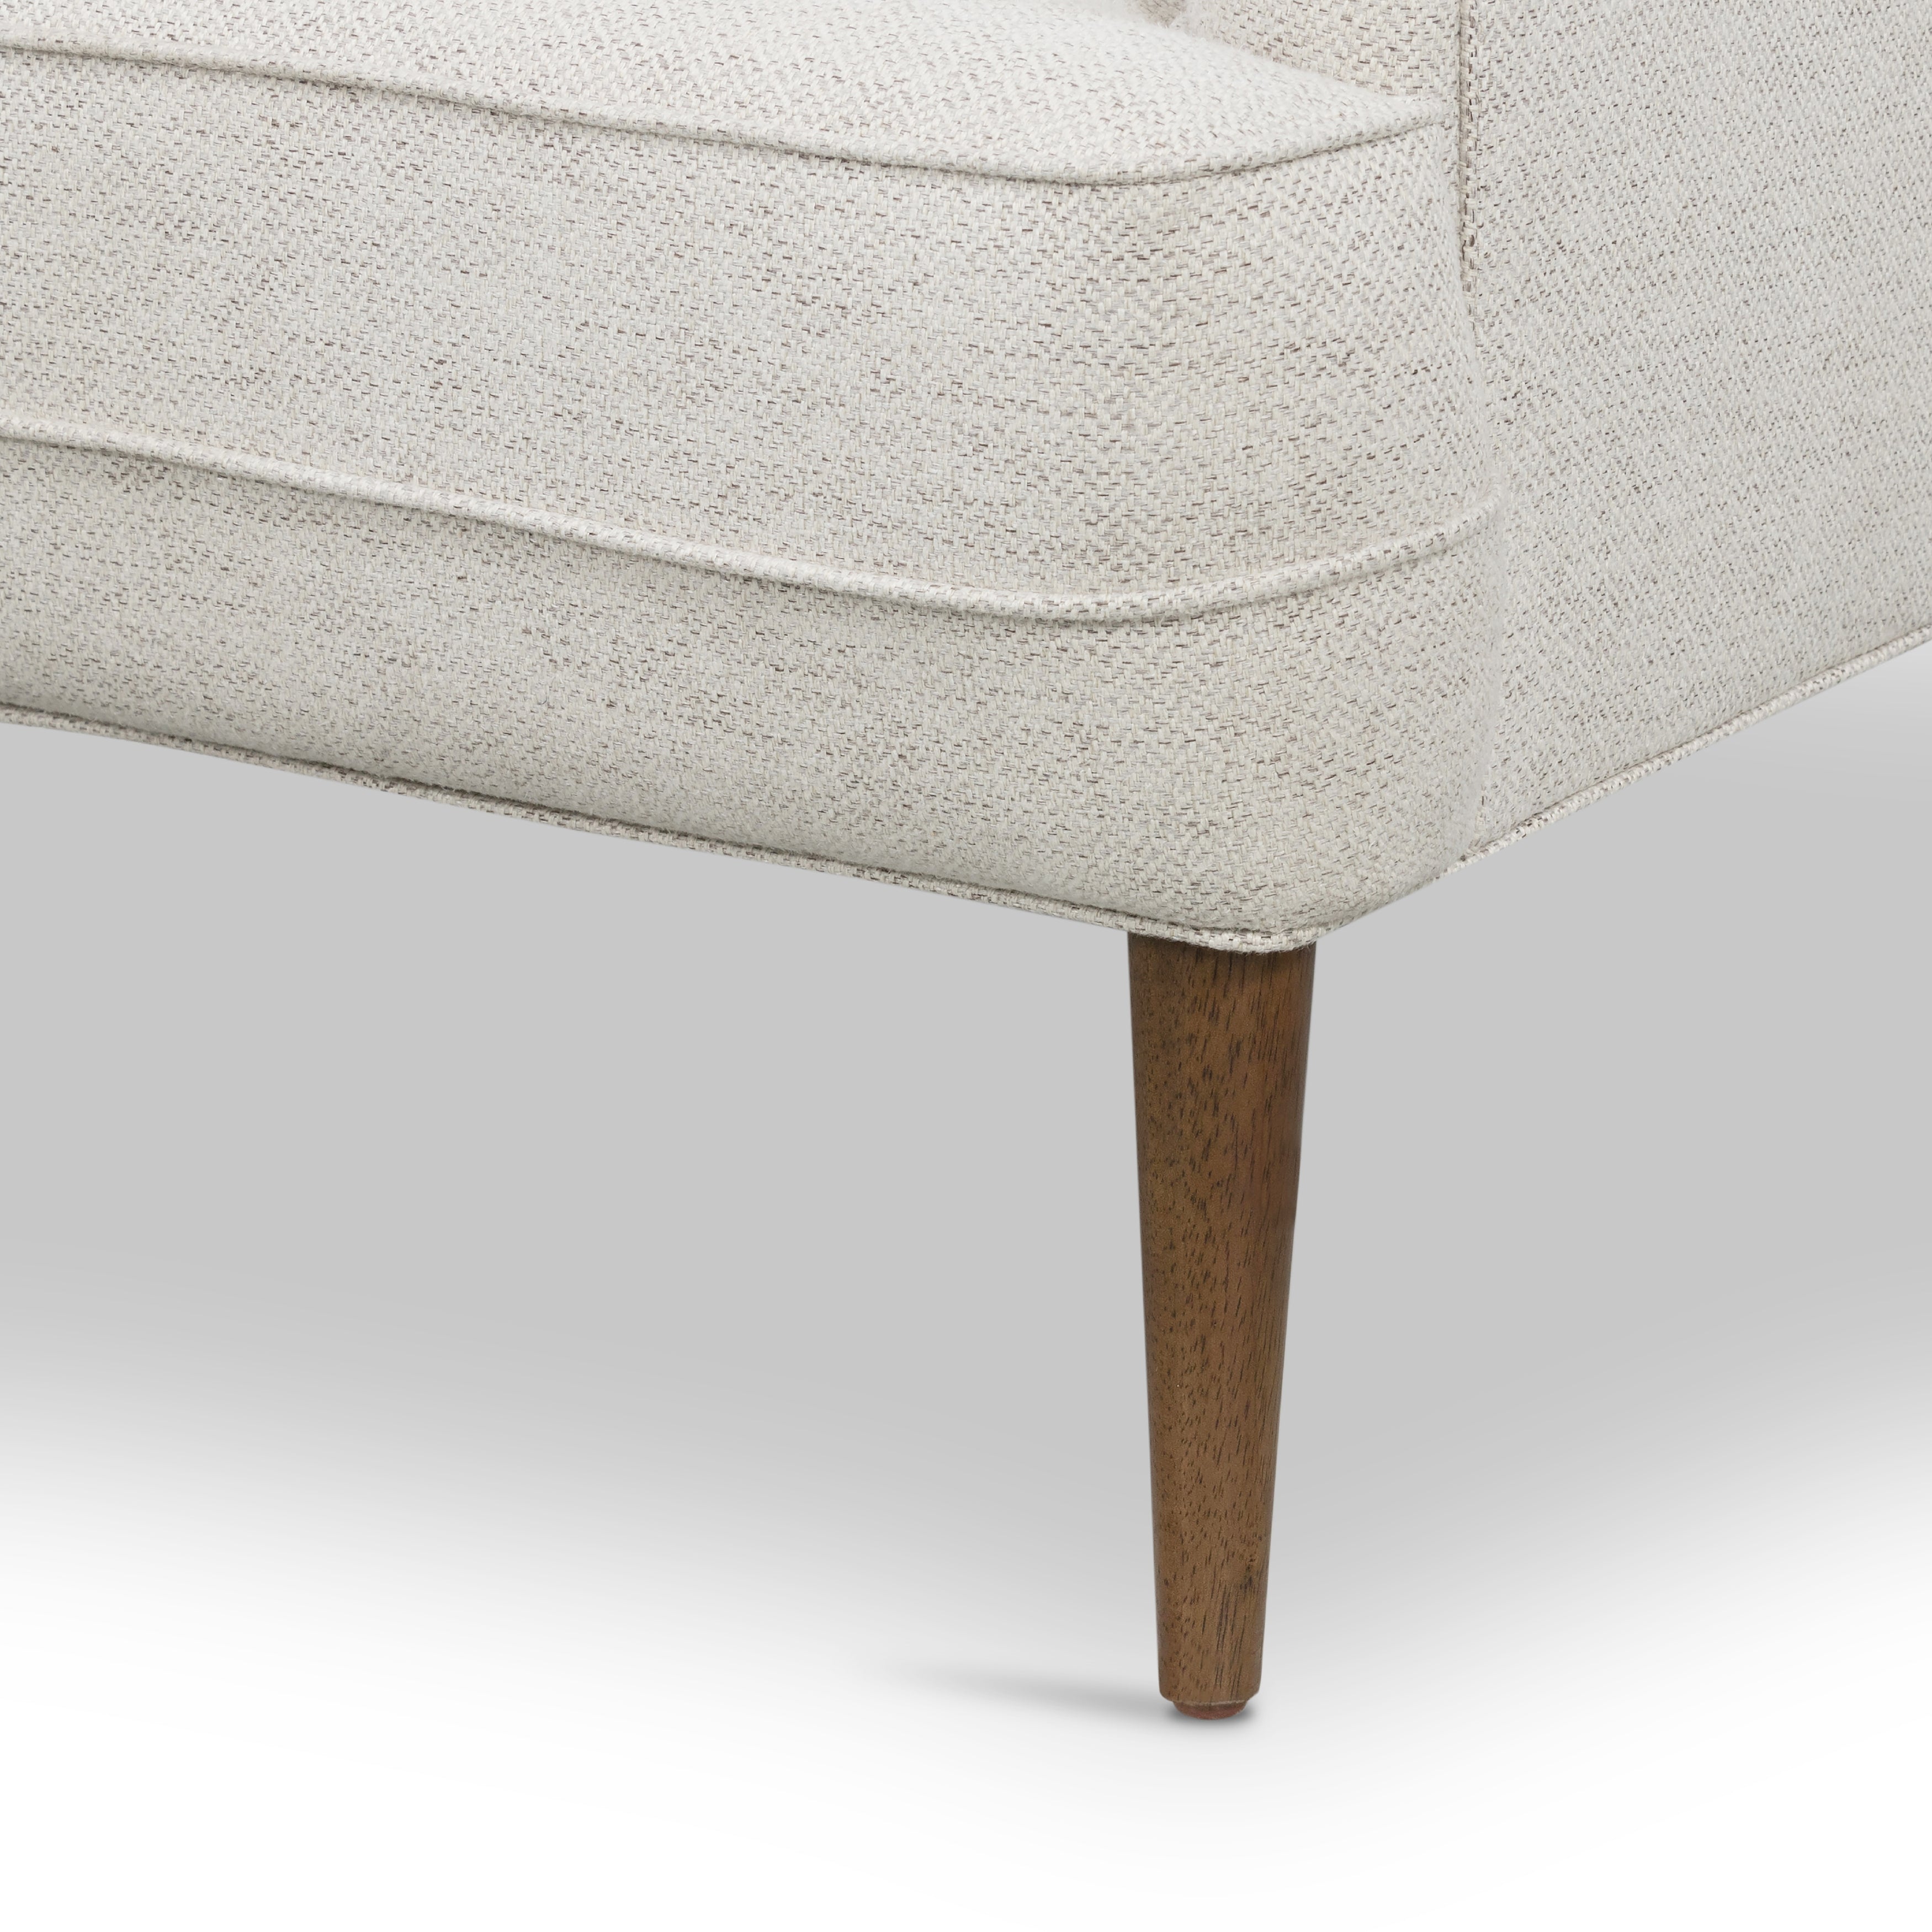 Noble Platinum Fabric with Almond Parawood | Danya Chair | Valley Ridge Furniture